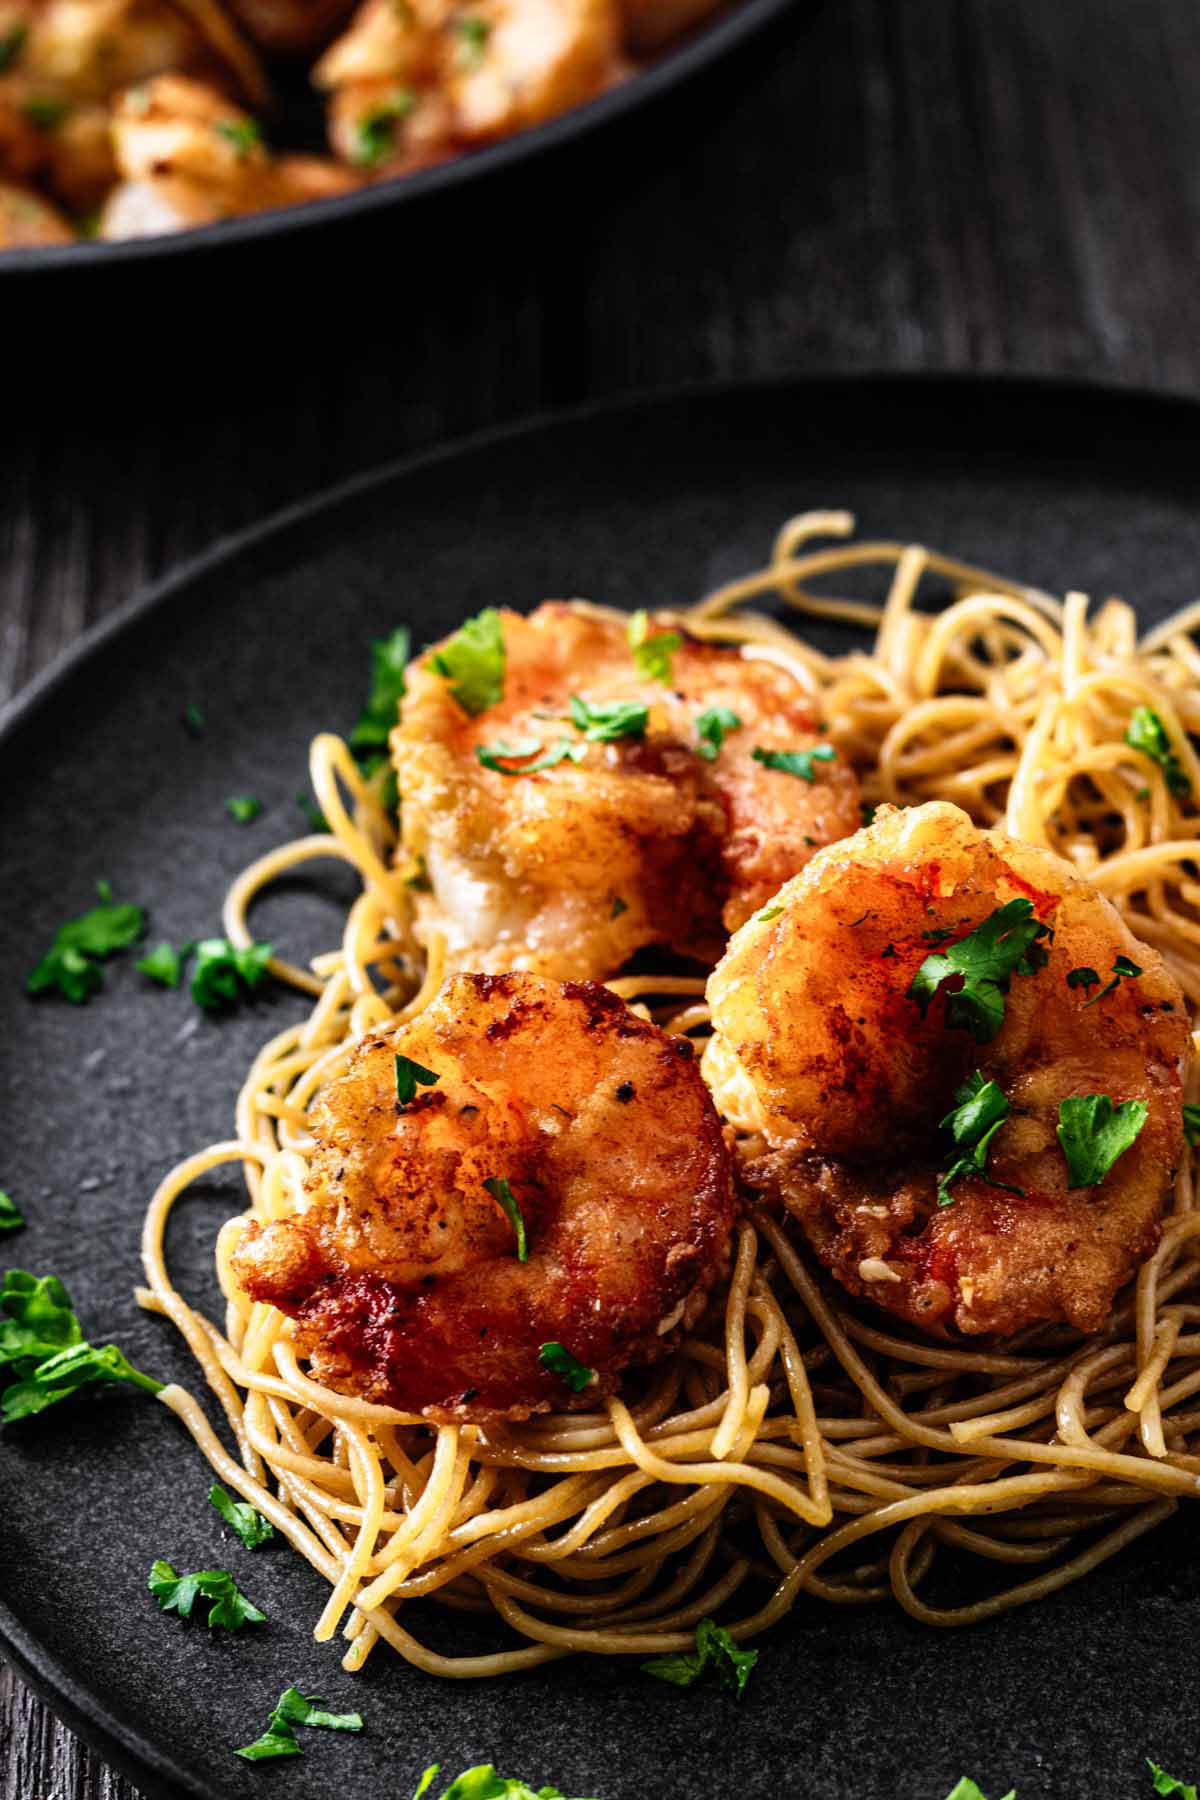 Three cooked shrimp on a bed of cooked thin spaghetti garnished with chopped parsley on a dark plate.